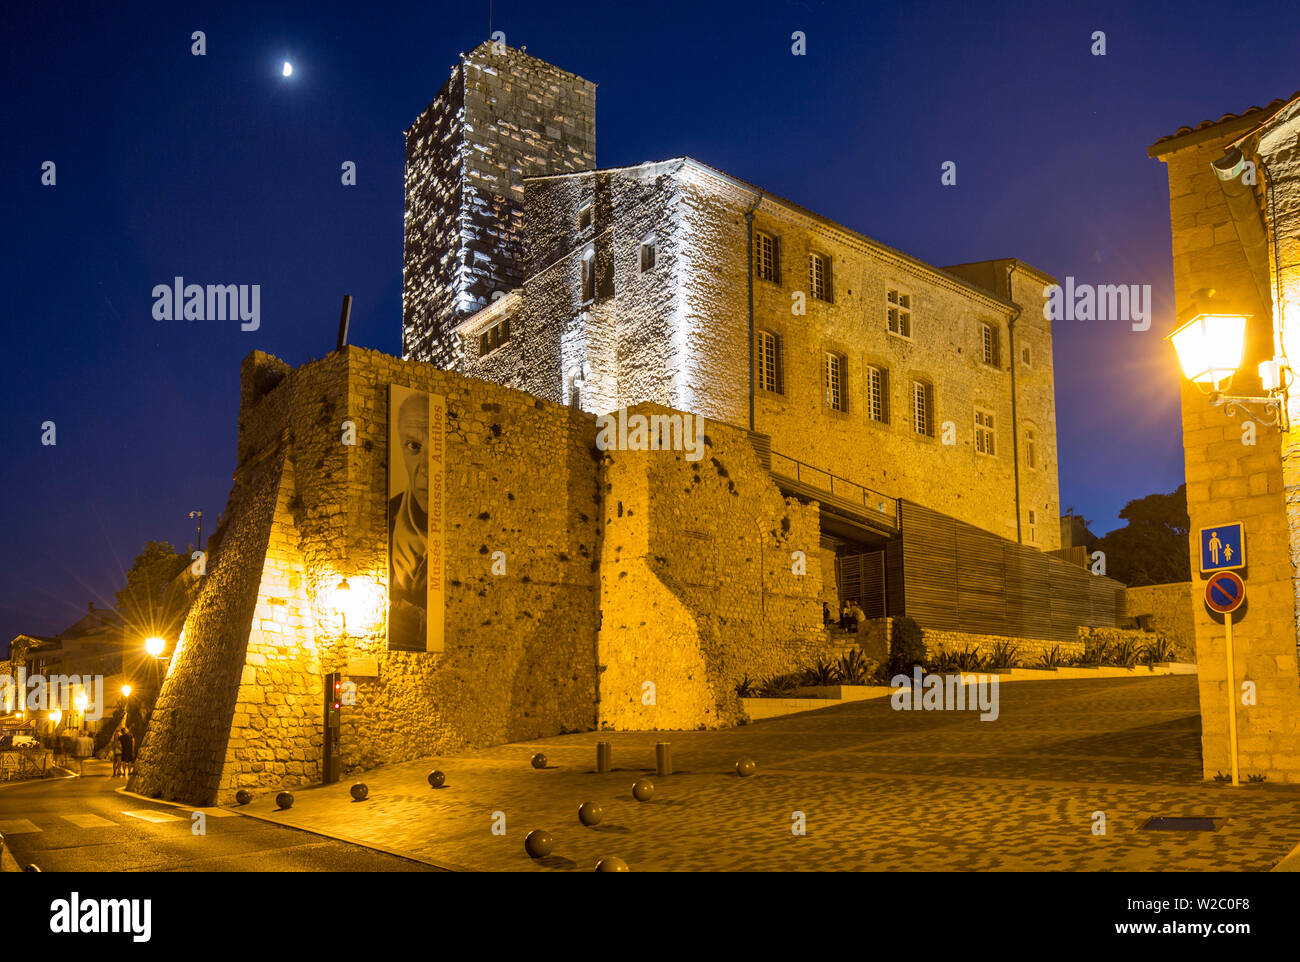 Musee Picasso, Old town of Antibes, Alpes-Maritimes, Provence-Alpes-Cote D'Azur, French Riviera, France Stock Photo